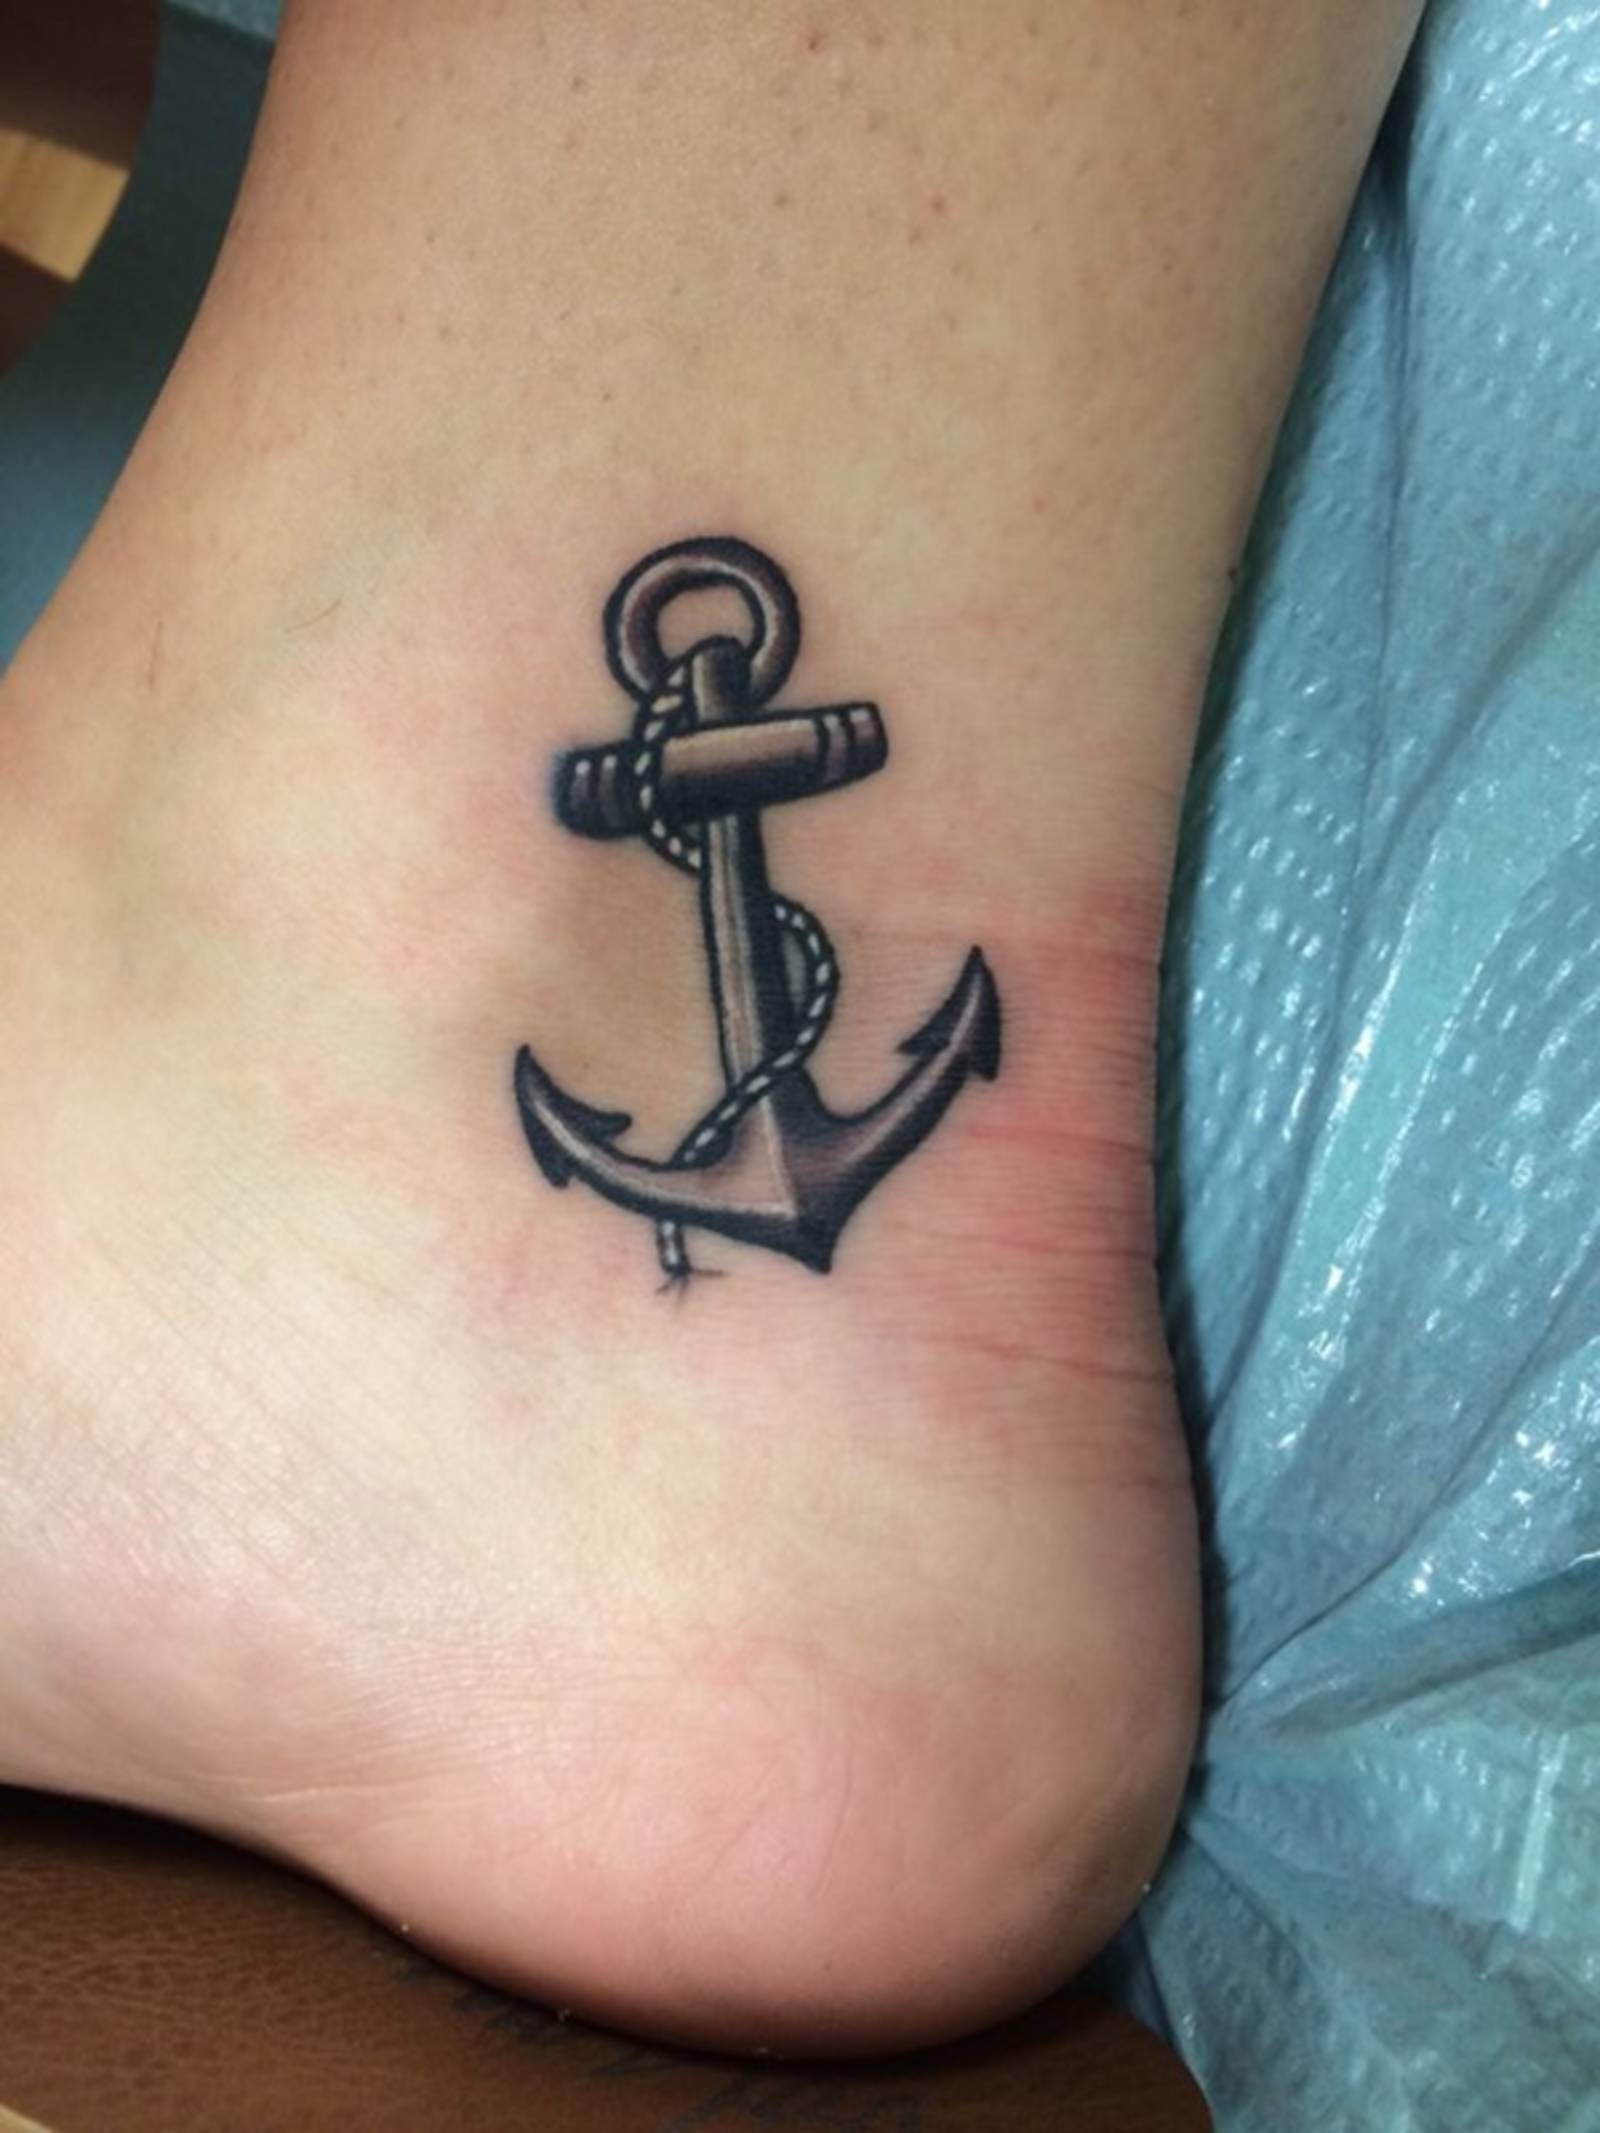 8 Tattoo Trends We'll Look Back At and Cringe - Galore